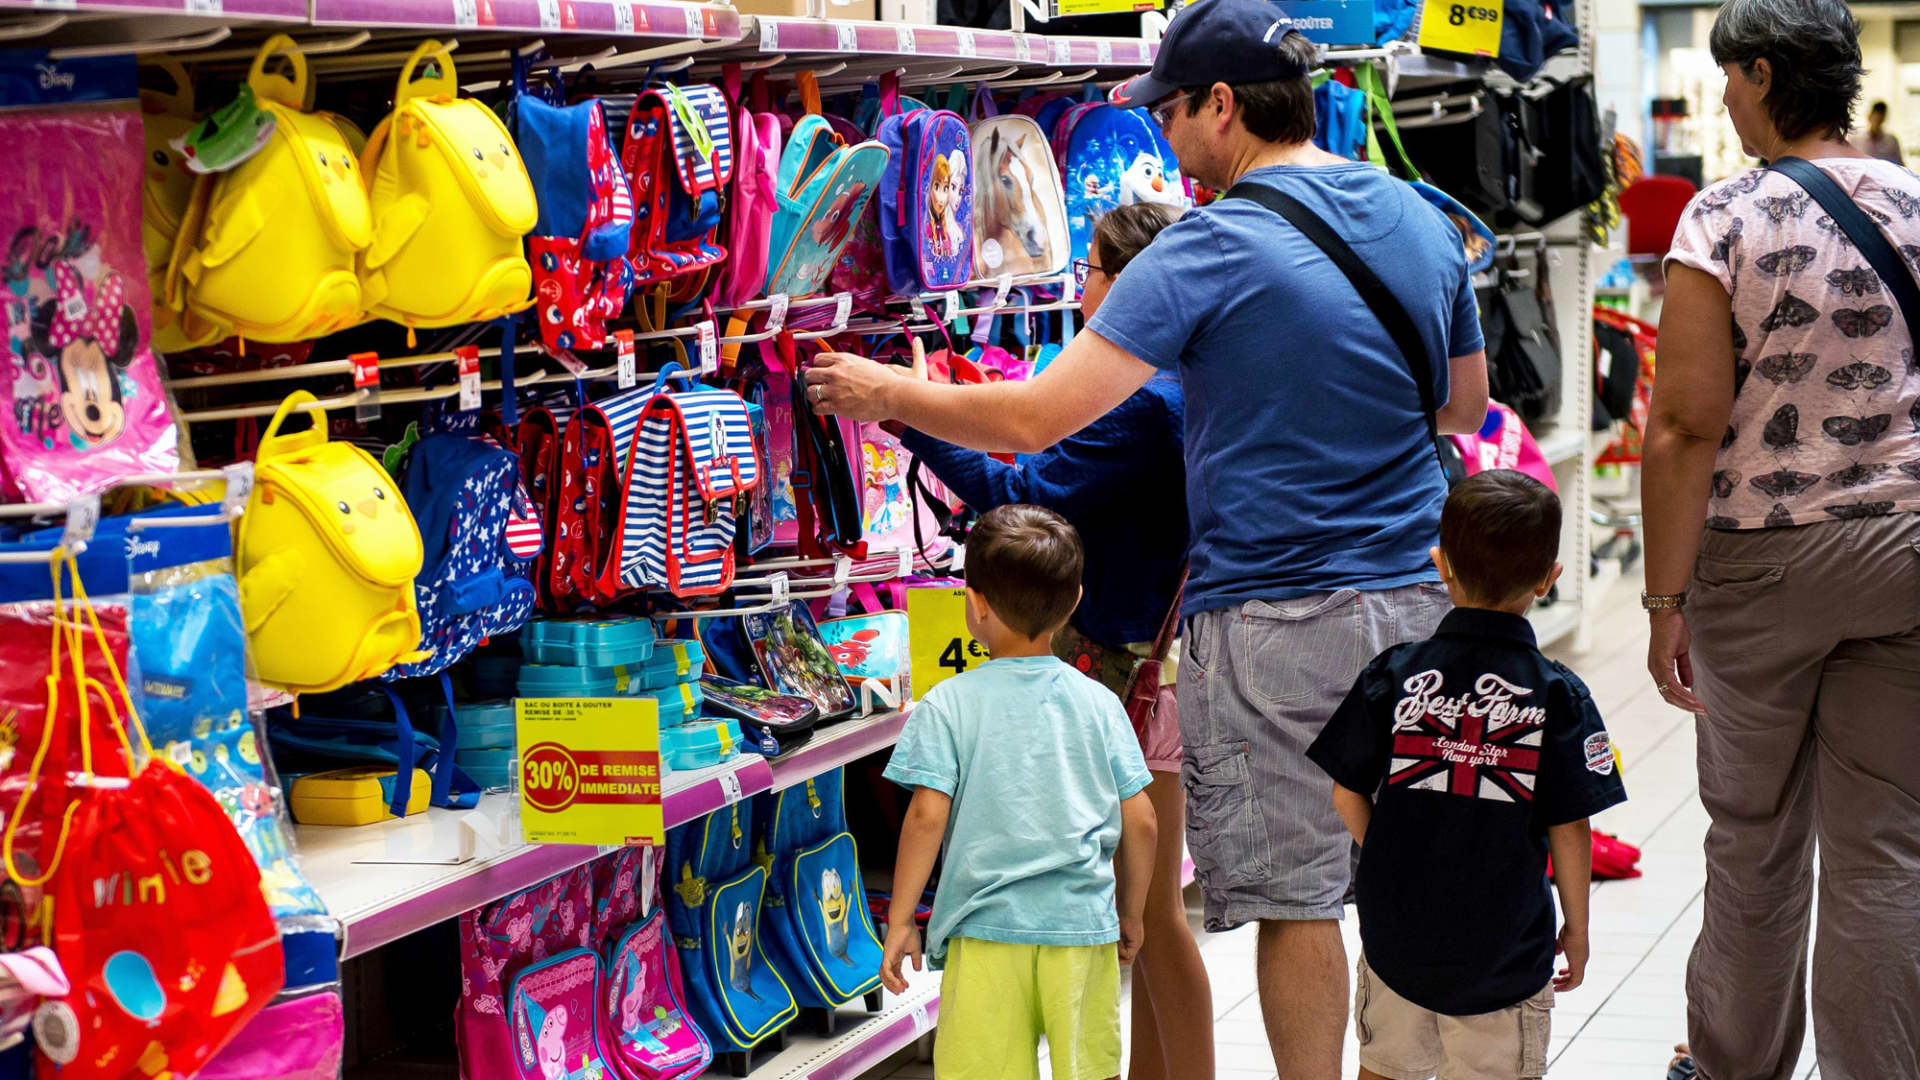 Parents face the most expensive back-to-school season to date. Here’s how to save on supplies, deal hunters say